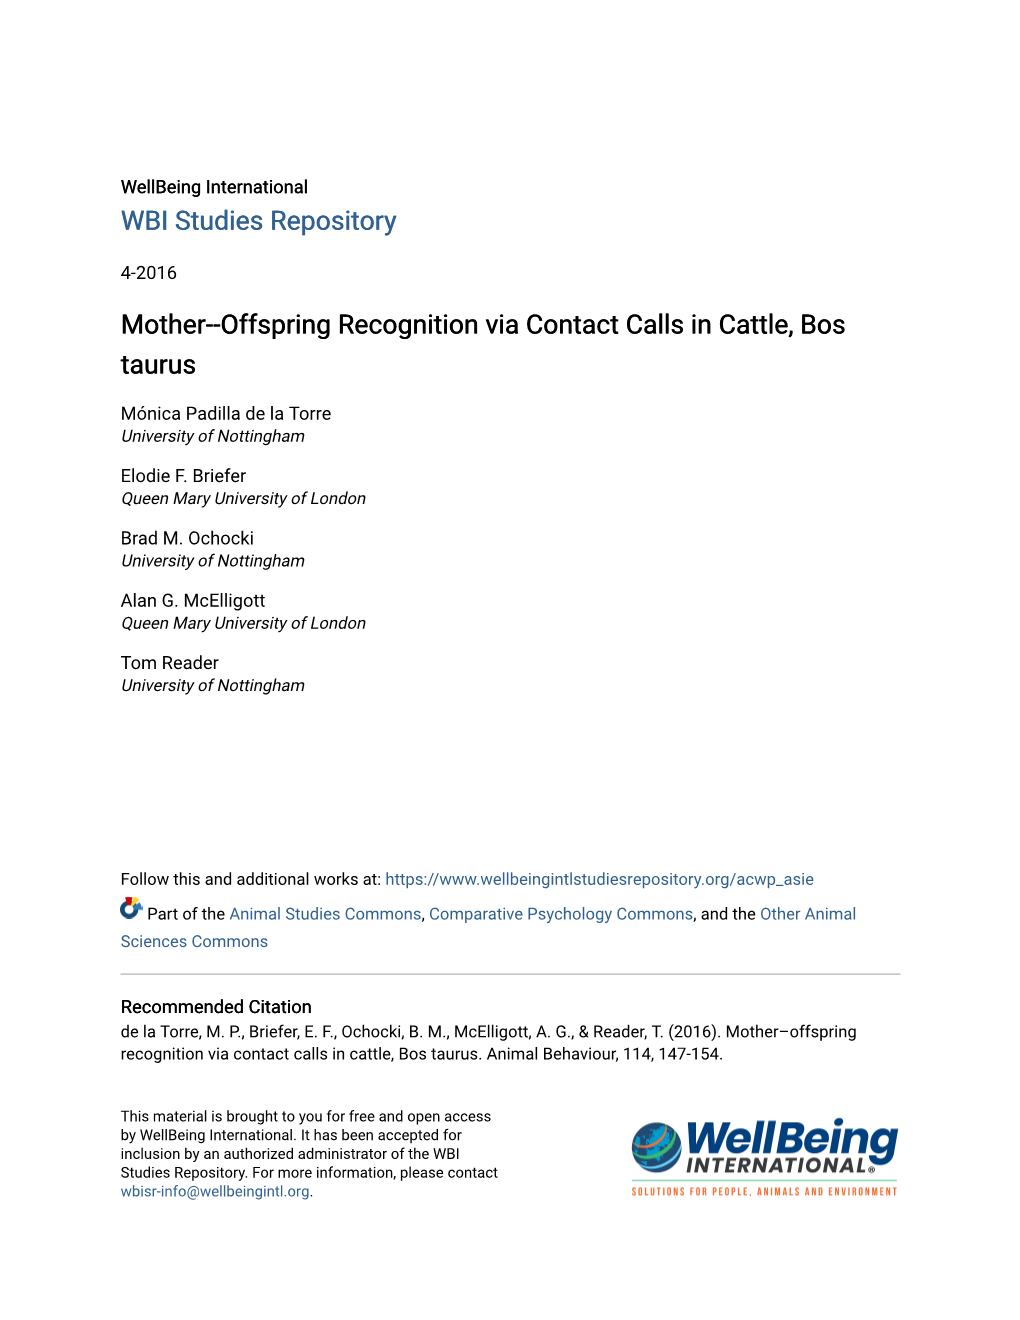 Mother--Offspring Recognition Via Contact Calls in Cattle, Bos Taurus